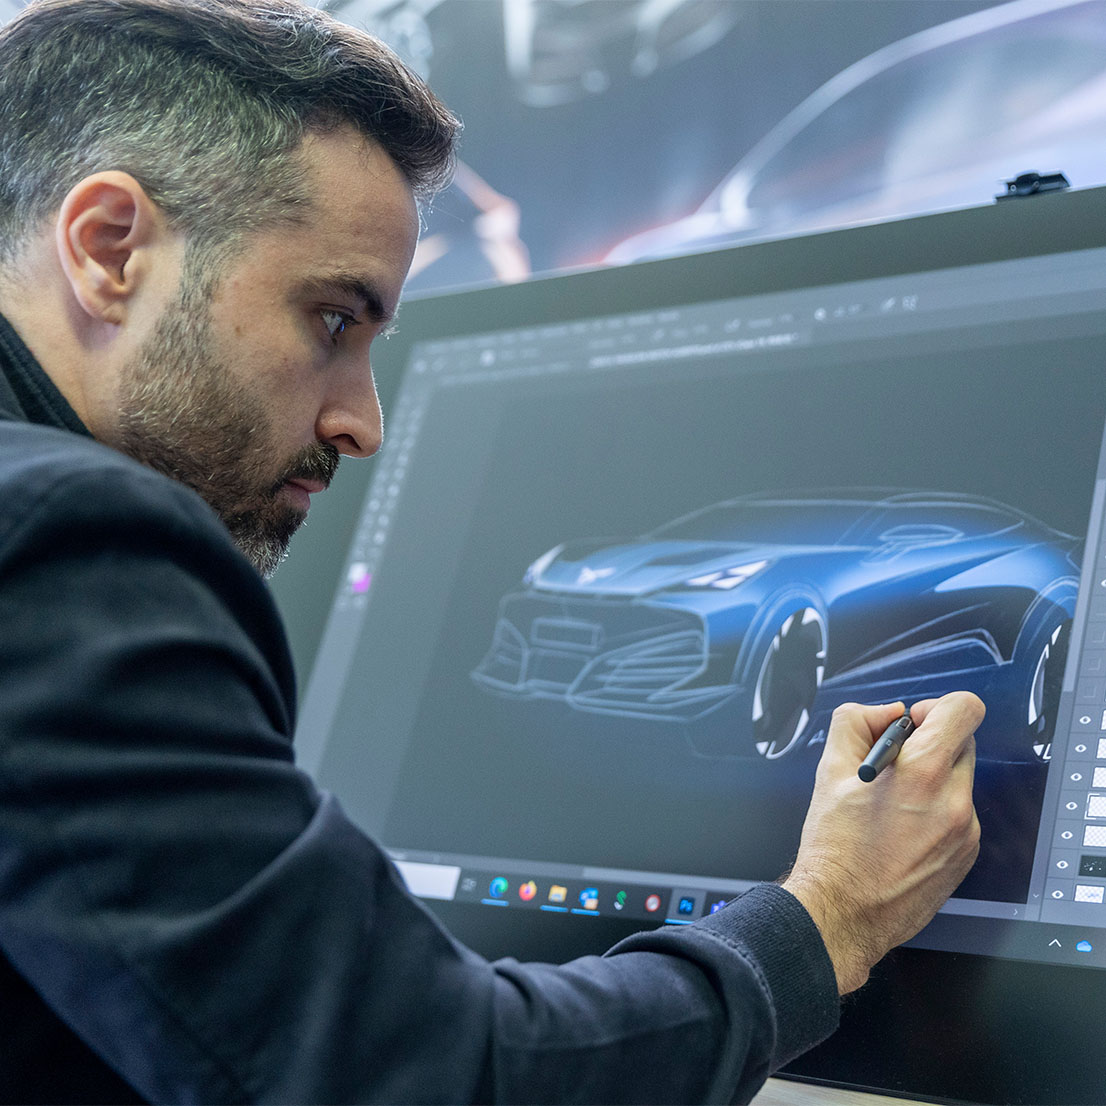 new design language for cupra tavascan, exterior design process with touchscreen